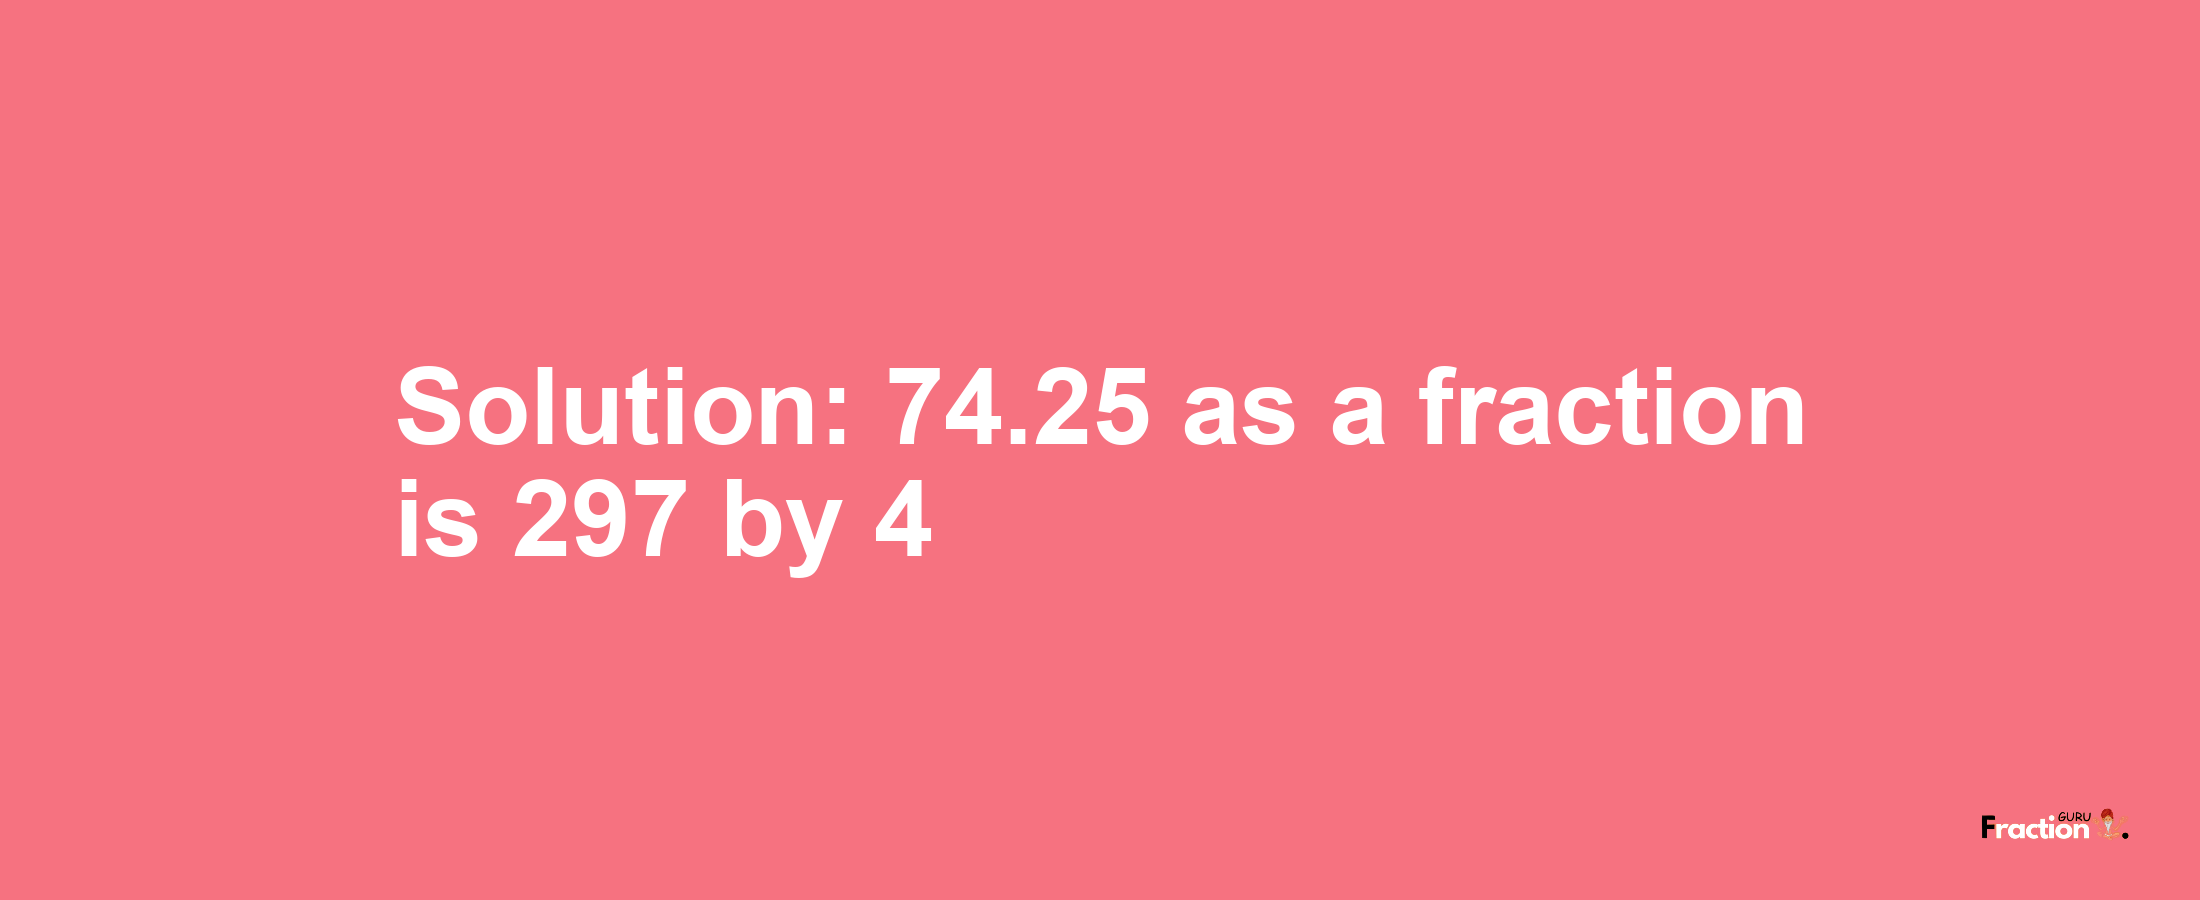 Solution:74.25 as a fraction is 297/4